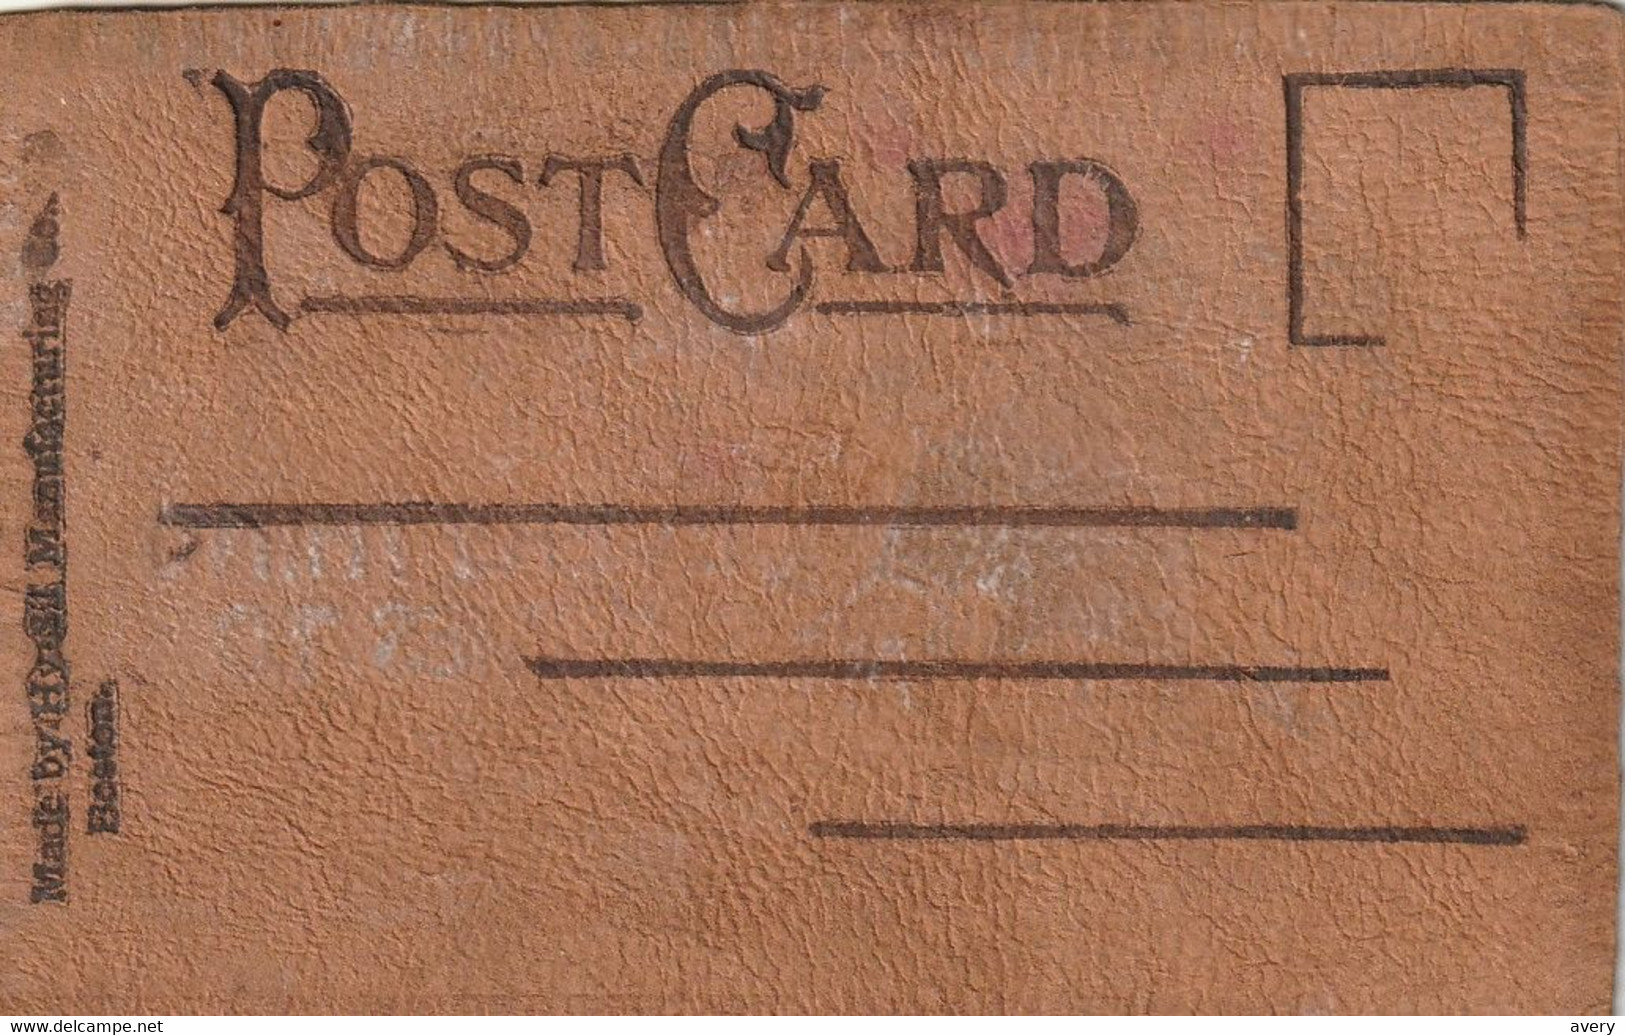 Leather Post Card, Post Office, Manchester, New Hampshire Regular Size - Manchester